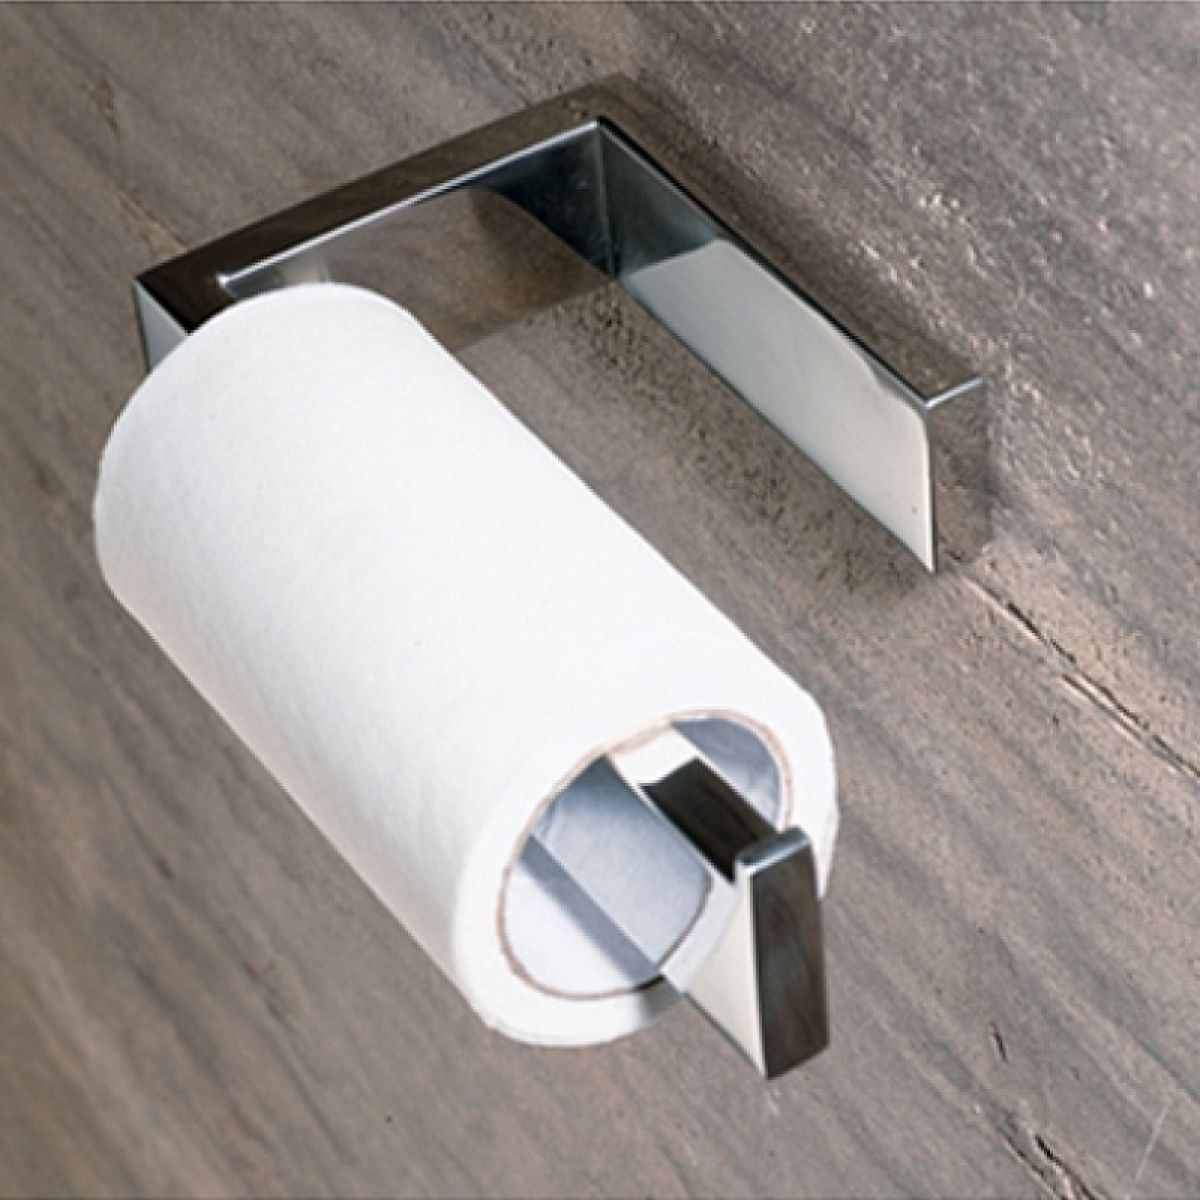 Stainless Steel Wall Mounted Toilet Roll Holder Polished Chrome Finish 